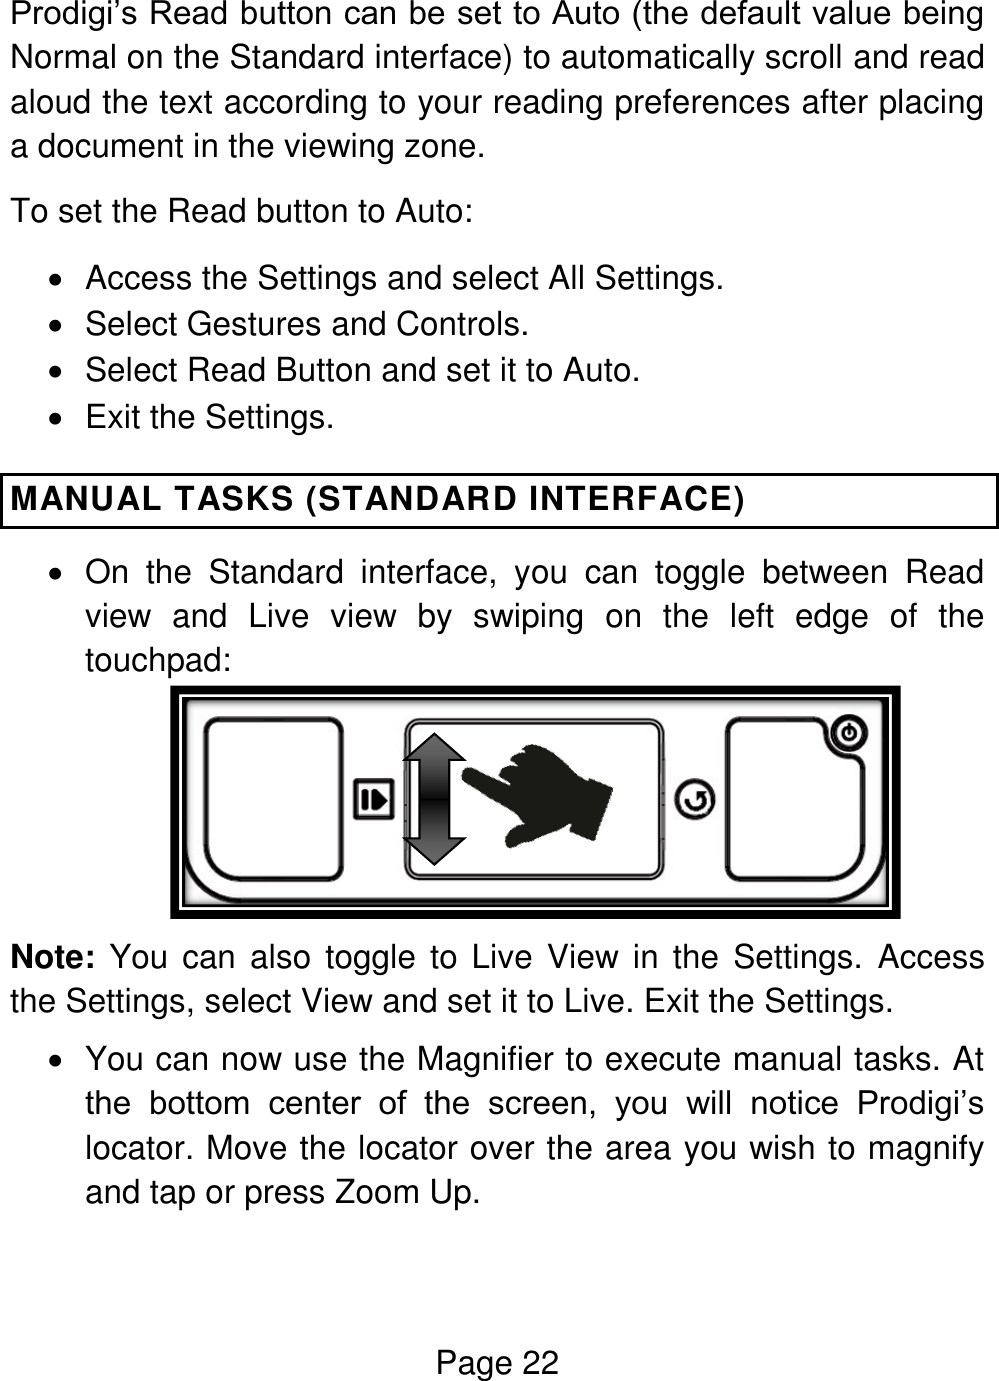 Page 22  Prodigi’s Read button can be set to Auto (the default value being Normal on the Standard interface) to automatically scroll and read aloud the text according to your reading preferences after placing a document in the viewing zone. To set the Read button to Auto:   Access the Settings and select All Settings.   Select Gestures and Controls.   Select Read Button and set it to Auto.    Exit the Settings. MANUAL TASKS (STANDARD INTERFACE)   On  the  Standard  interface,  you  can  toggle  between  Read view  and  Live  view  by  swiping  on  the  left  edge  of  the touchpad:   Note: You can  also toggle to  Live  View in the  Settings.  Access the Settings, select View and set it to Live. Exit the Settings.   You can now use the Magnifier to execute manual tasks. At the  bottom  center  of  the  screen,  you  will  notice  Prodigi’s locator. Move the locator over the area you wish to magnify and tap or press Zoom Up. 